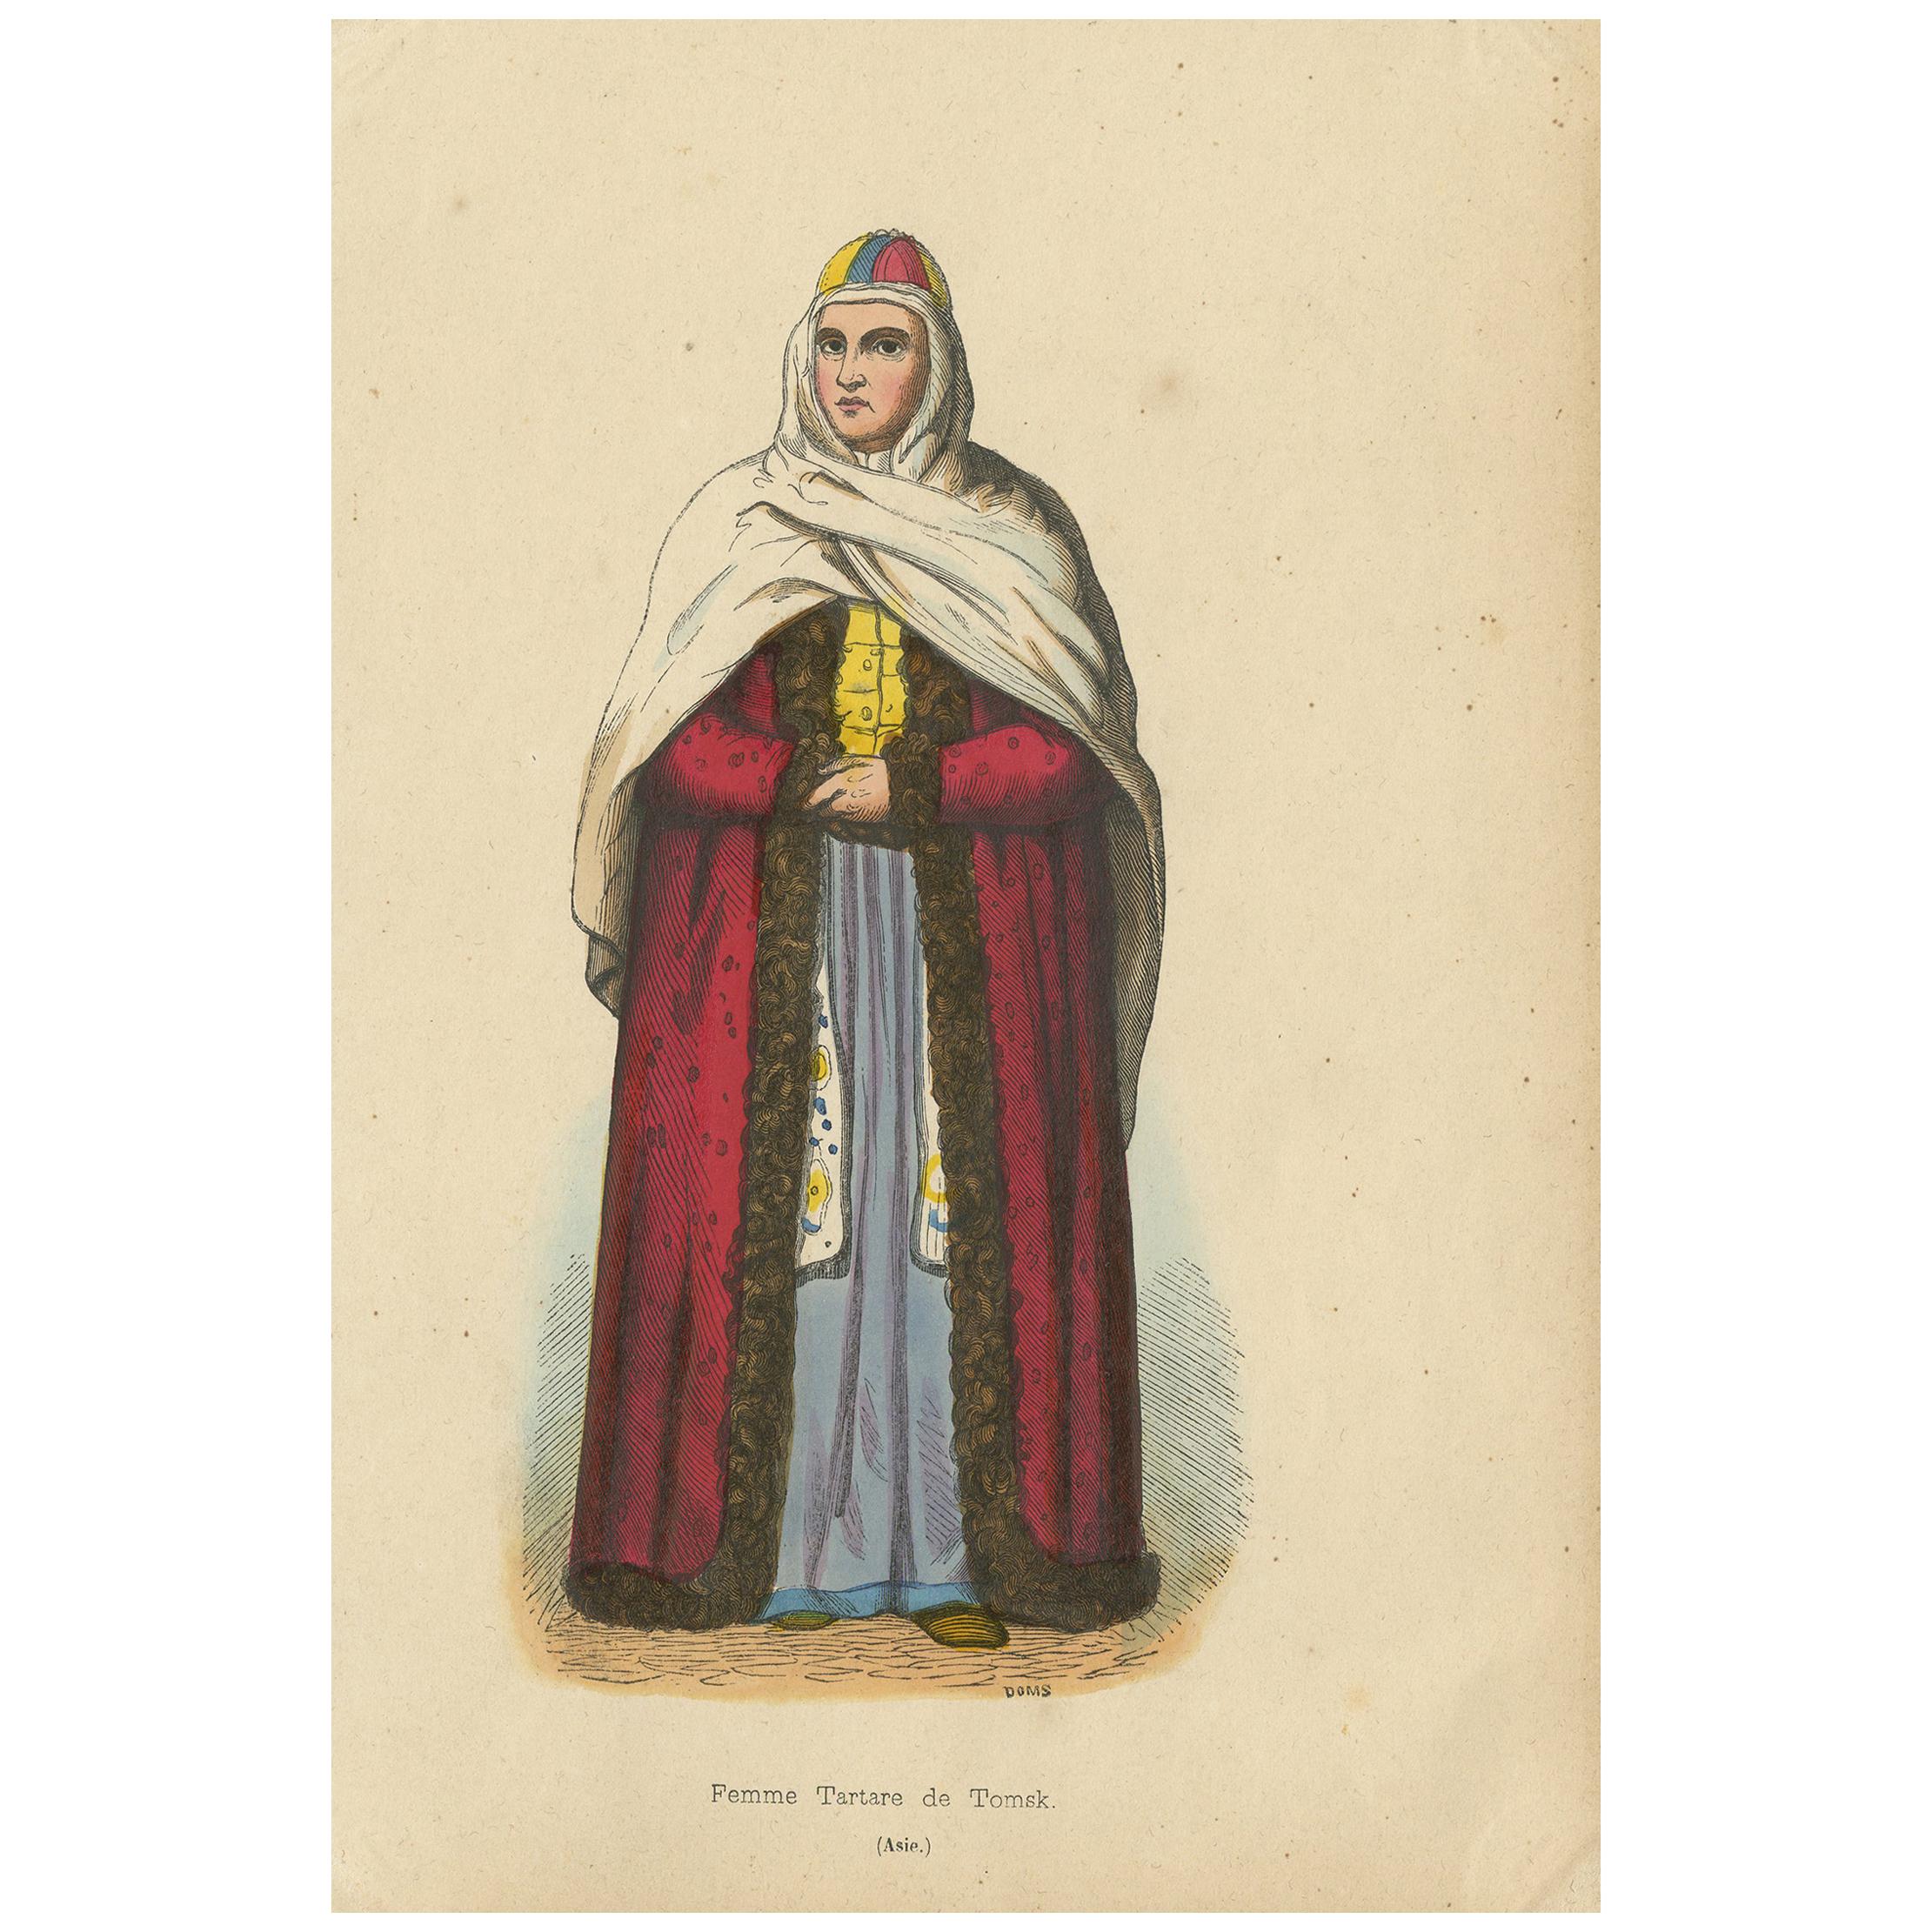 Antique Costume Print of a Tartar Woman from Tomsk by Wahlen, 1843